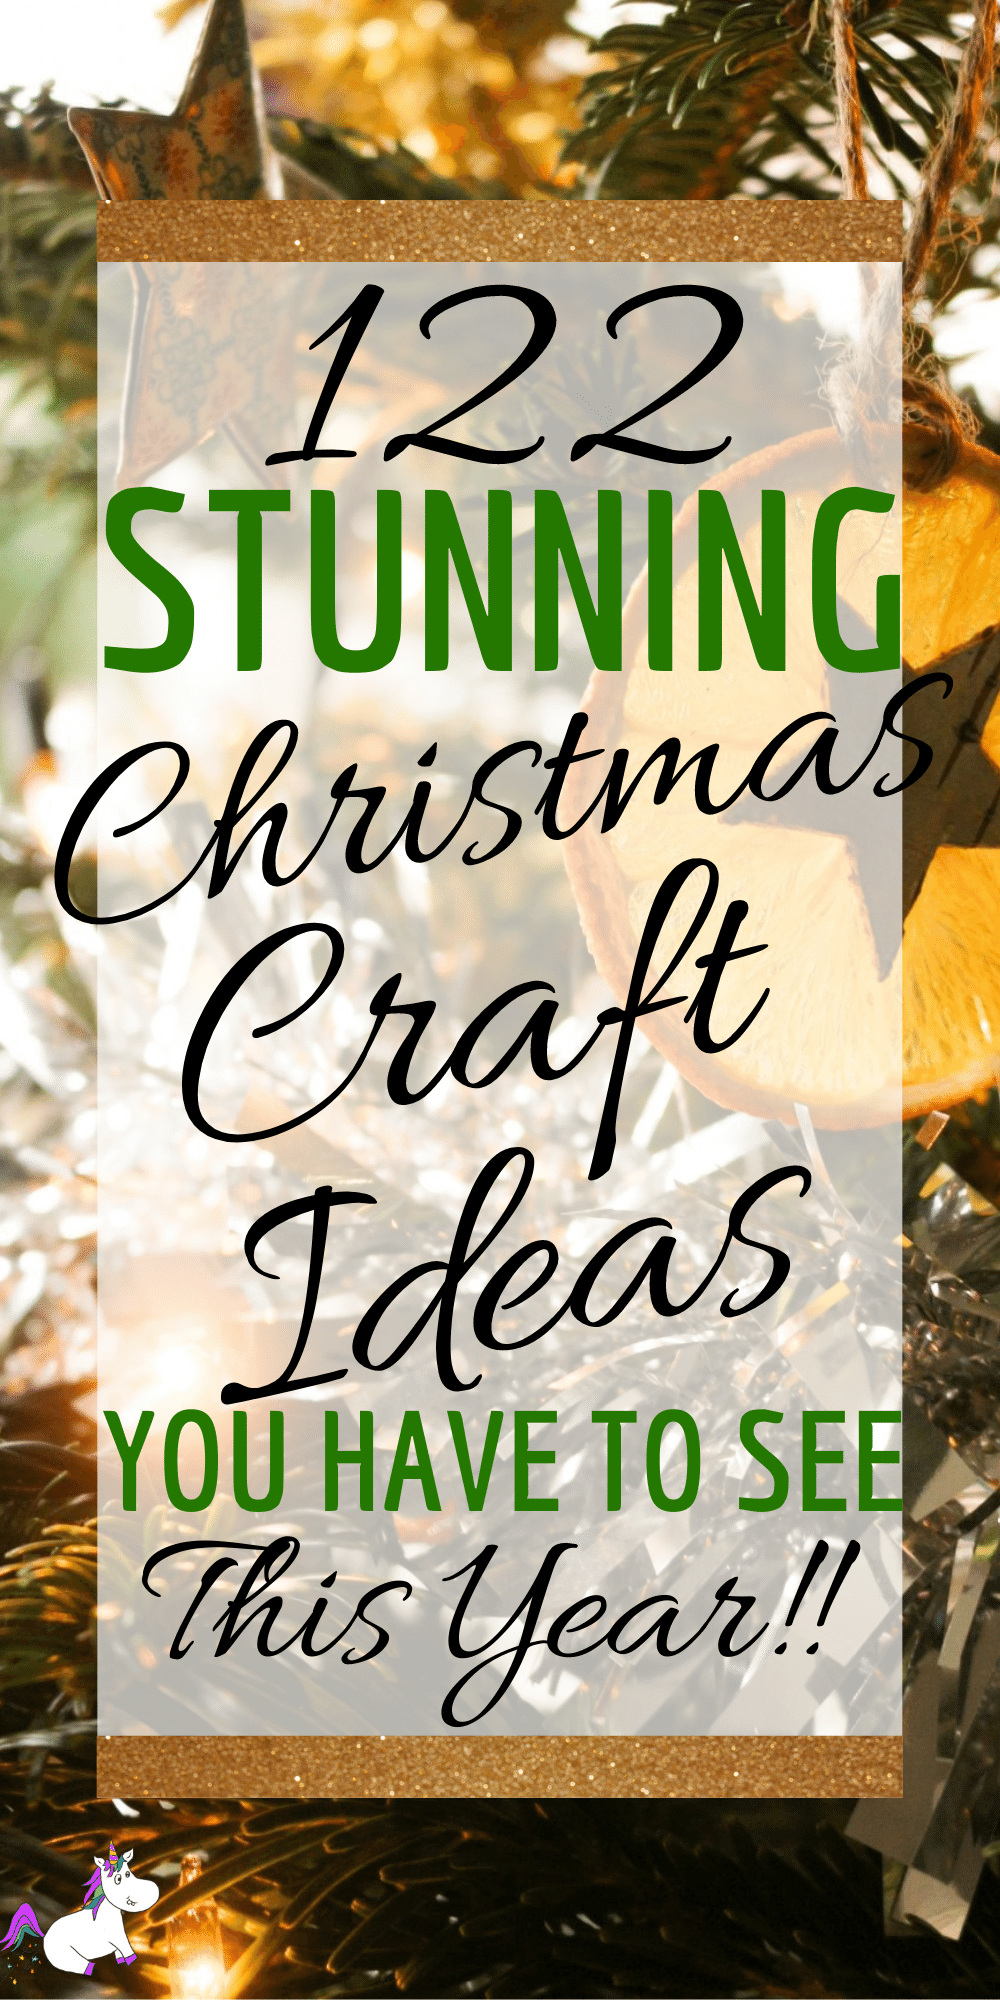 122 Christmas Crafts That are Stunningly Beautiful and easy to do! Whether you're looking for the perfect gift wrapping ideas or the best diy Christmas ornaments for your tree, this post has got you covered! You'll find Christmas wreaths, Tree decorations, handmade gift ideas and so much more. Click here to get all the inspiration #DIYchristmas #christmasdiy #diychristmasdecor #diychristmasdecorations